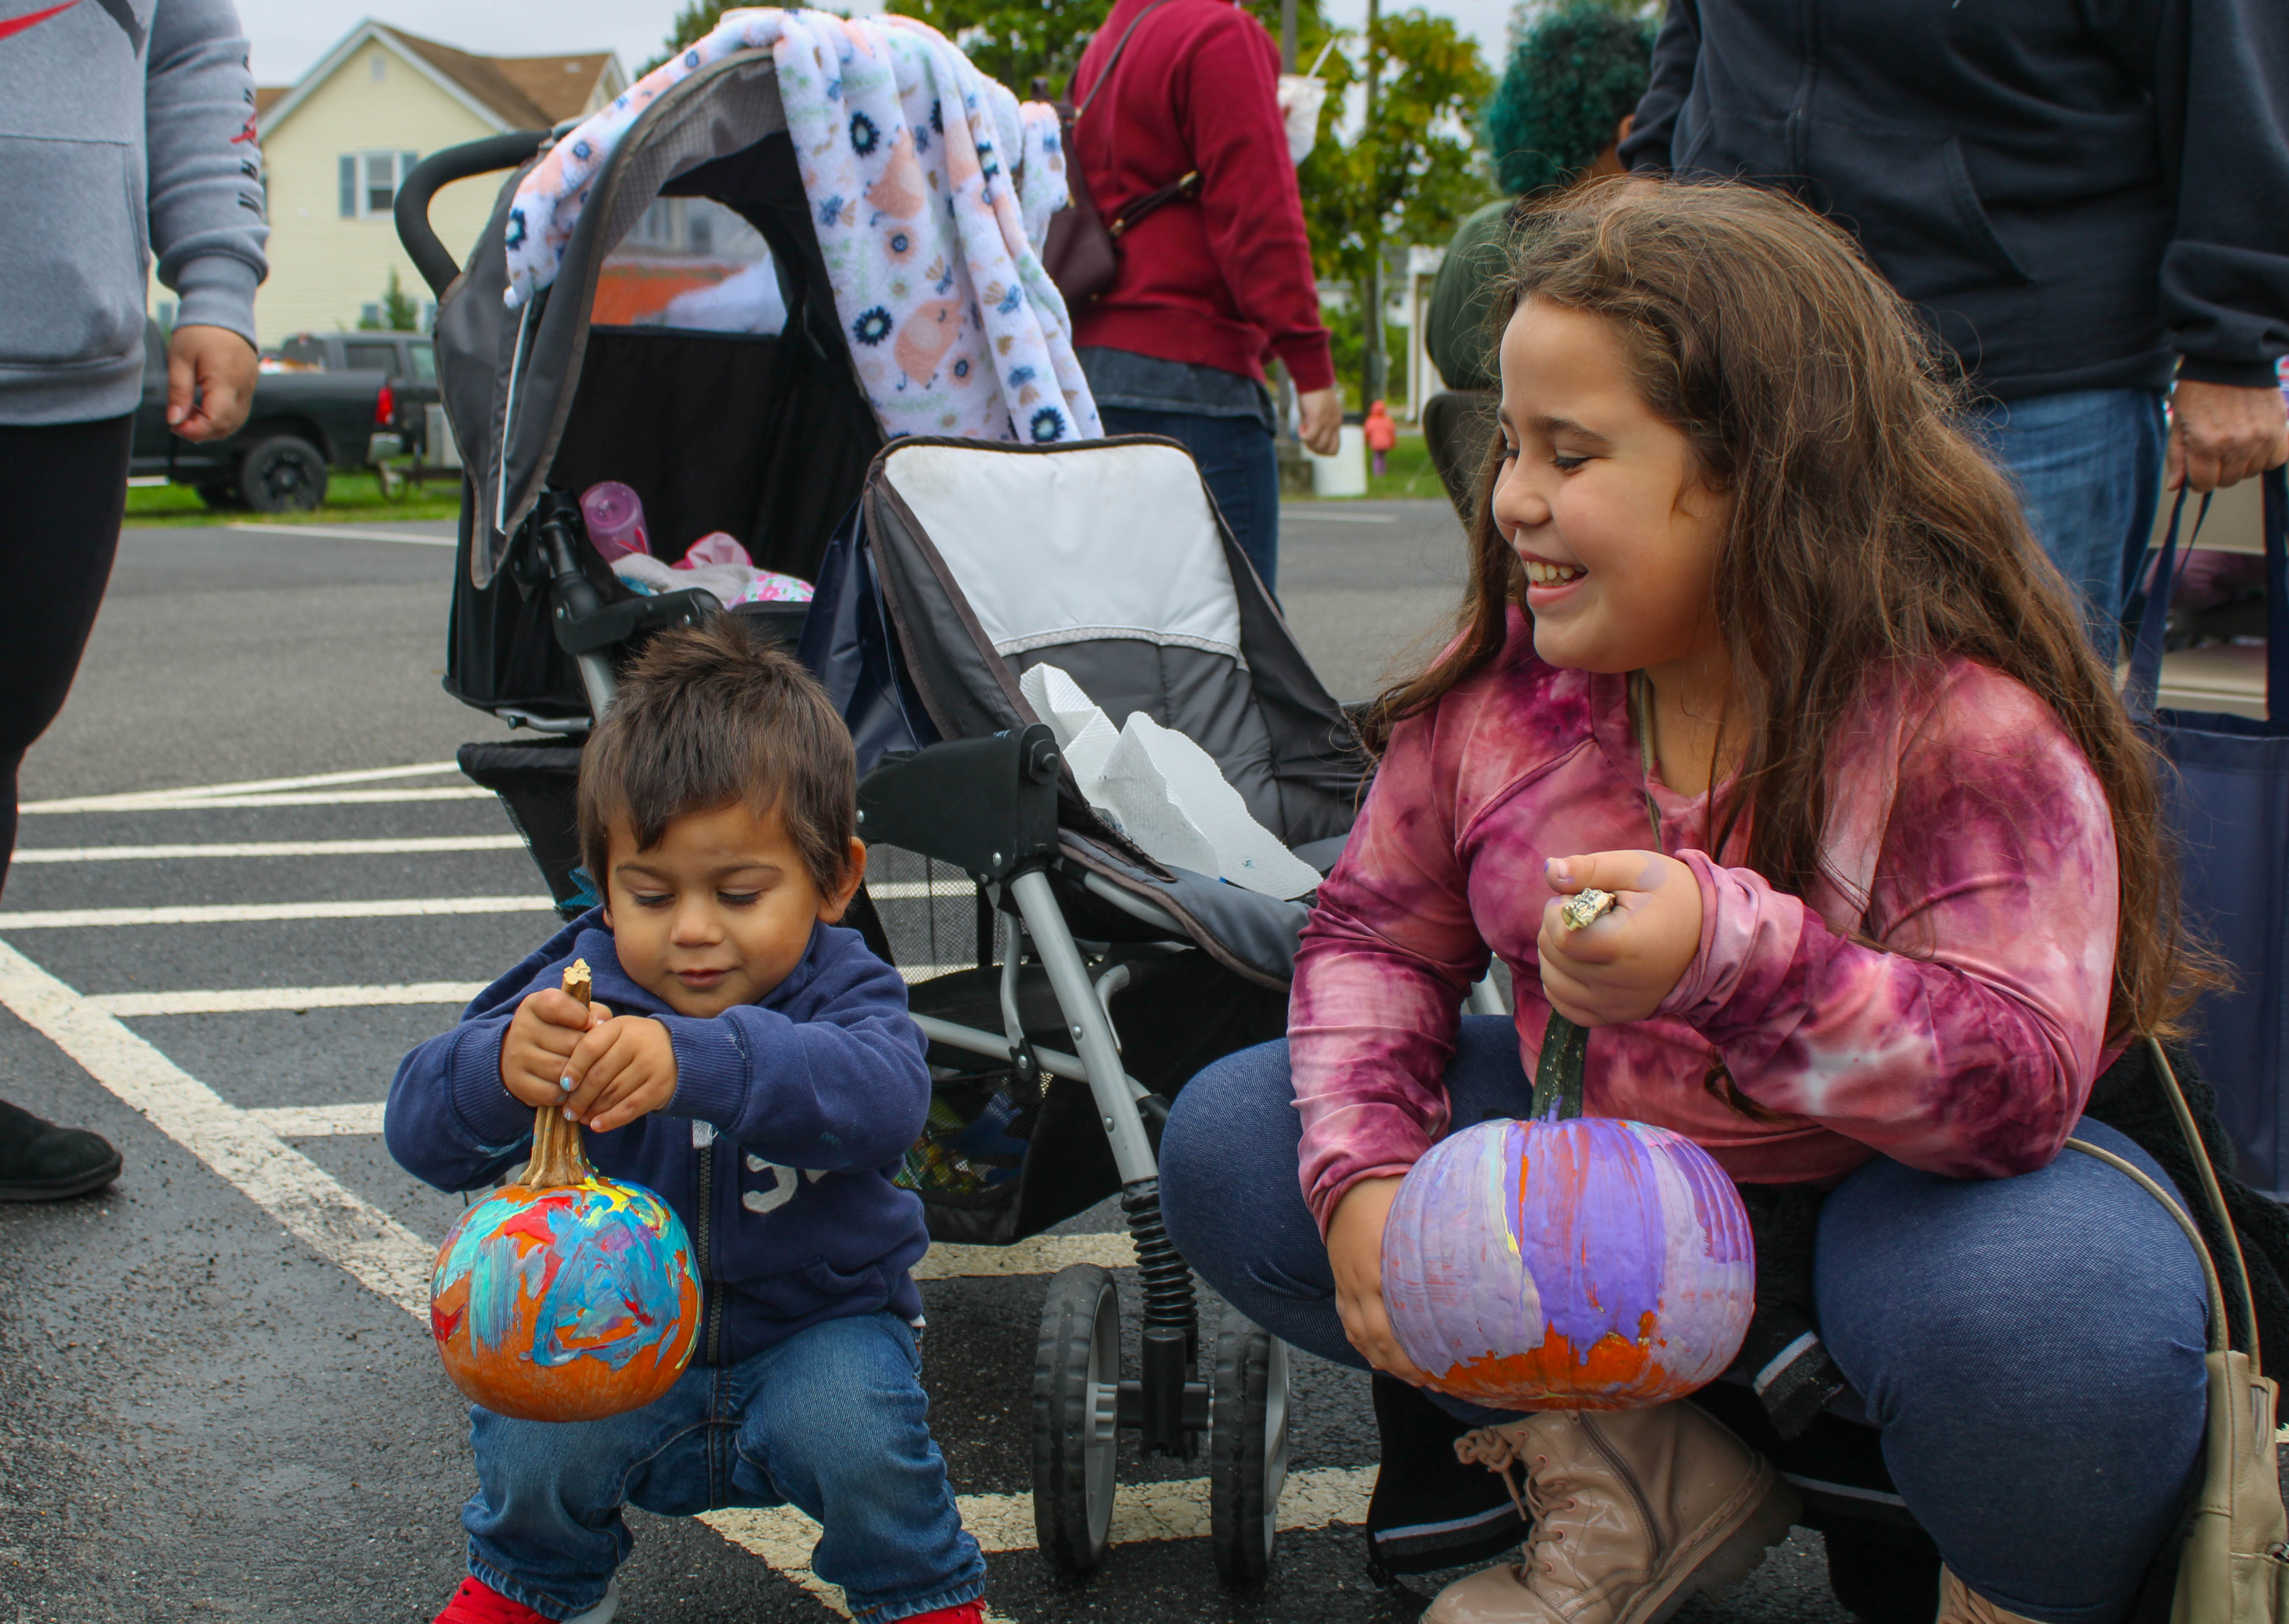 Keanu, 2, and Marlie Hernandez, 8, present their freshly painted pumpkins at the Harvest Day Festival in Elmer, Saturday, Oct. 1, 2022.